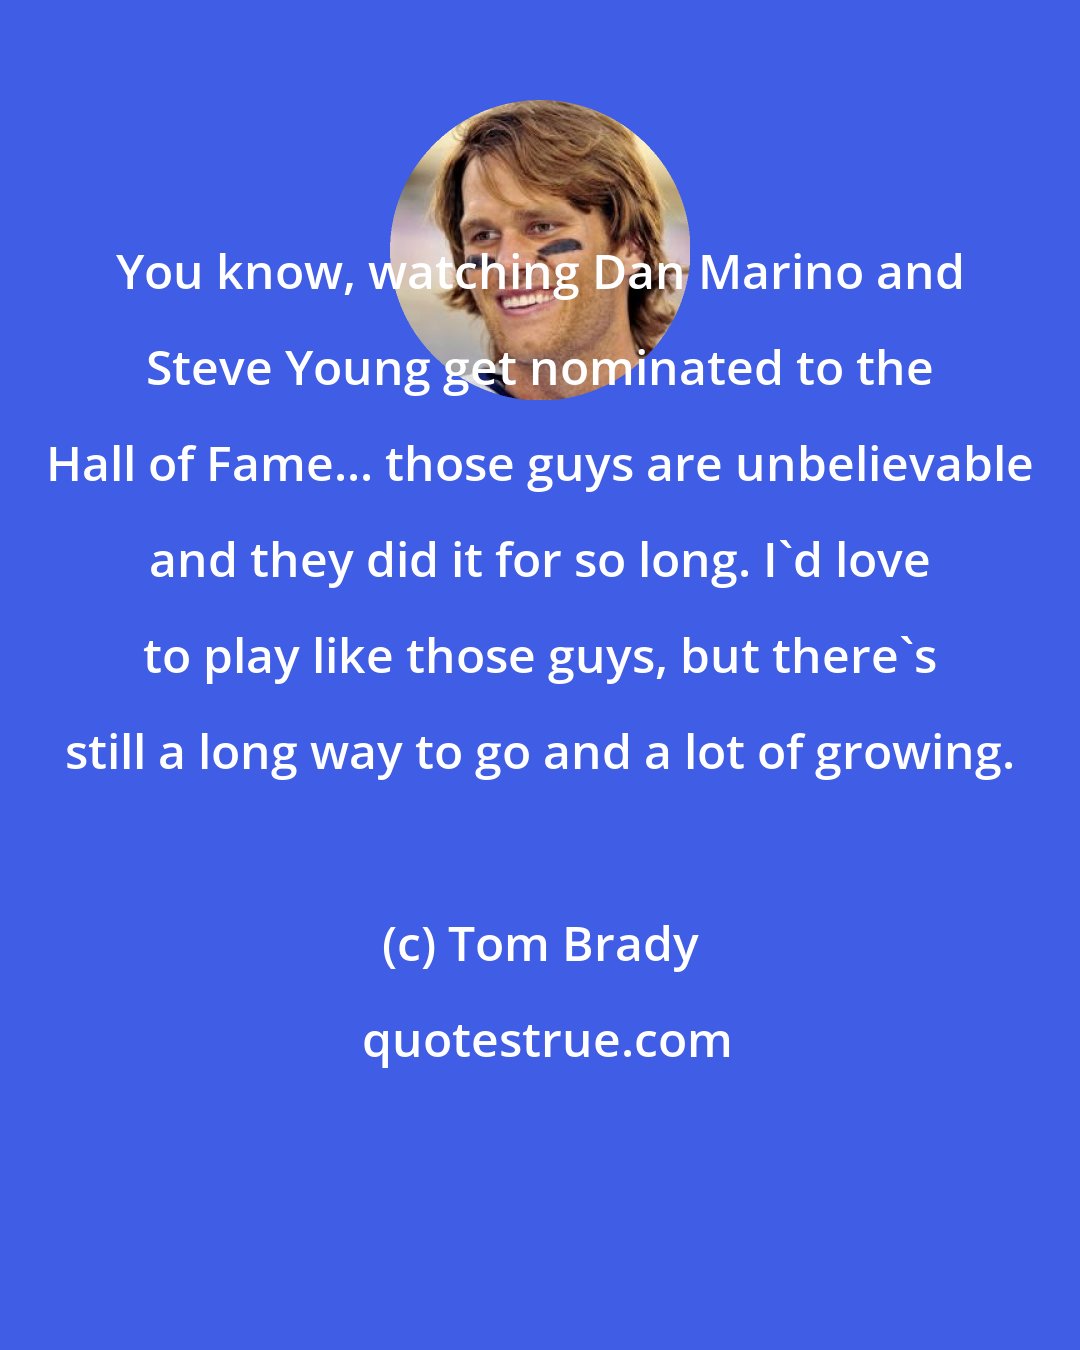 Tom Brady: You know, watching Dan Marino and Steve Young get nominated to the Hall of Fame... those guys are unbelievable and they did it for so long. I'd love to play like those guys, but there's still a long way to go and a lot of growing.